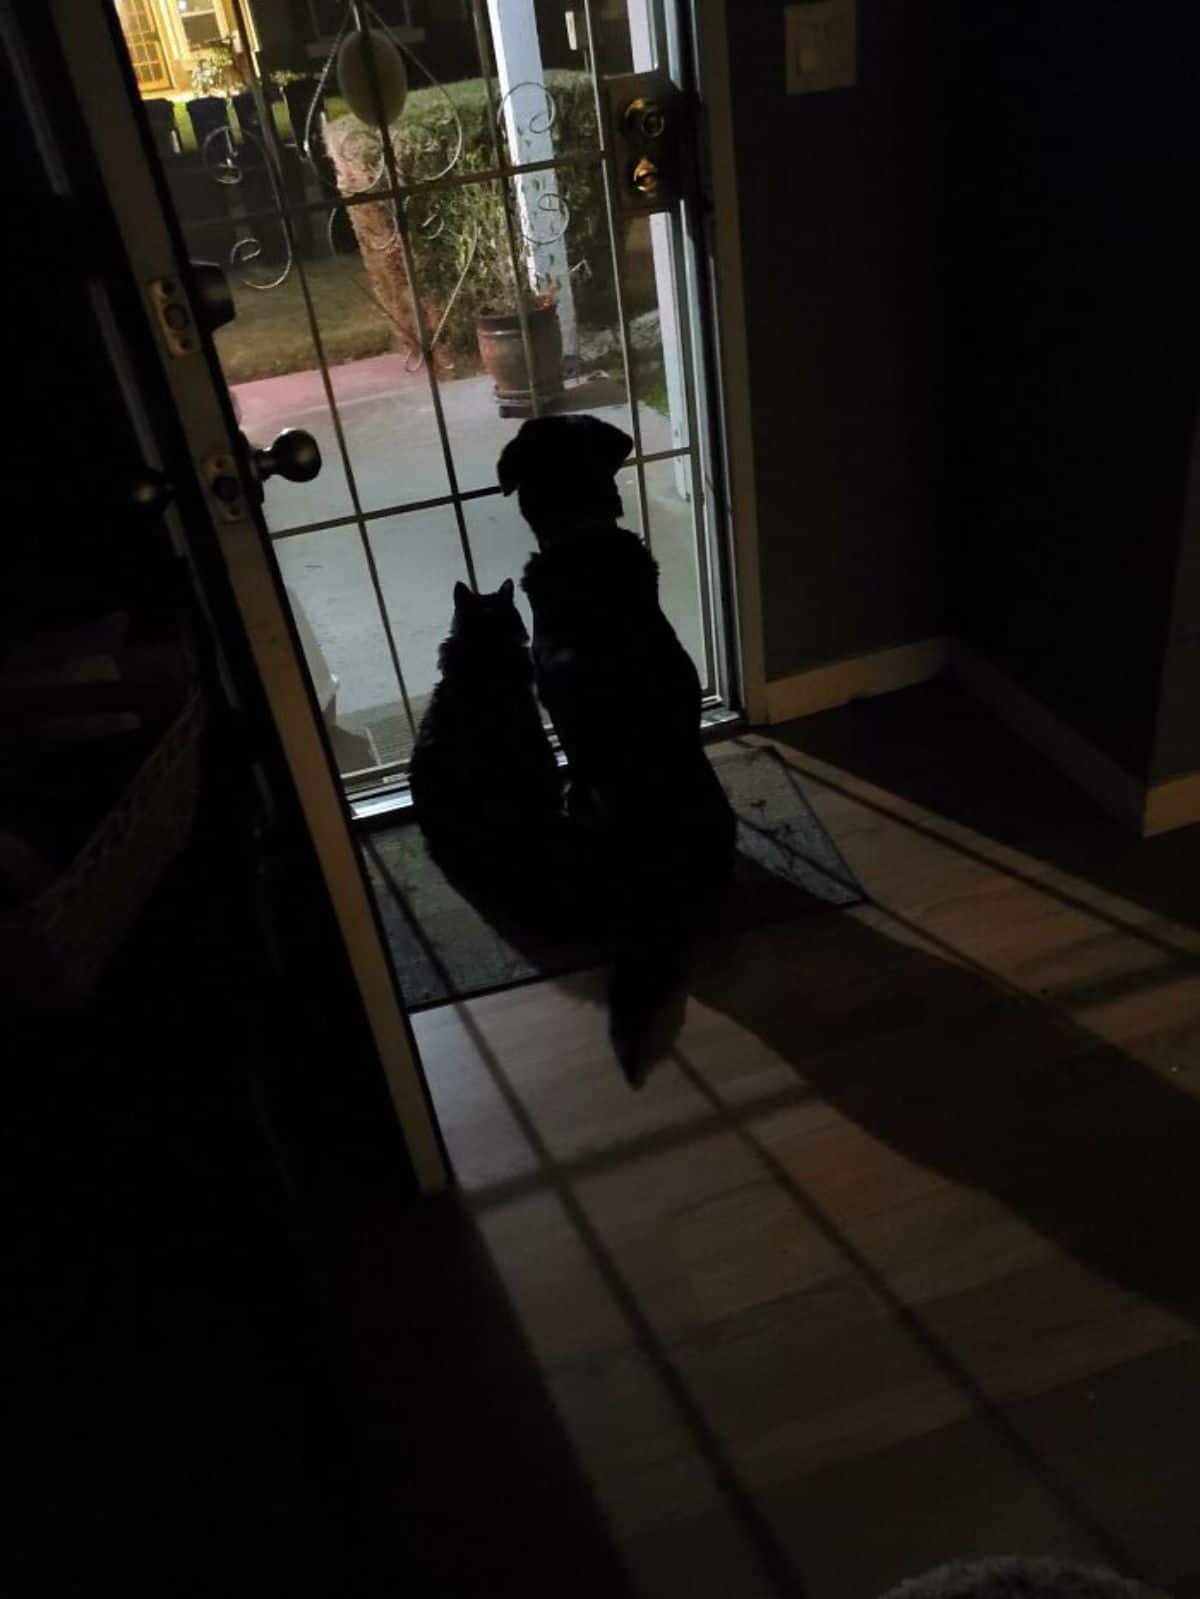 cat and dog sitting at a door in the dark